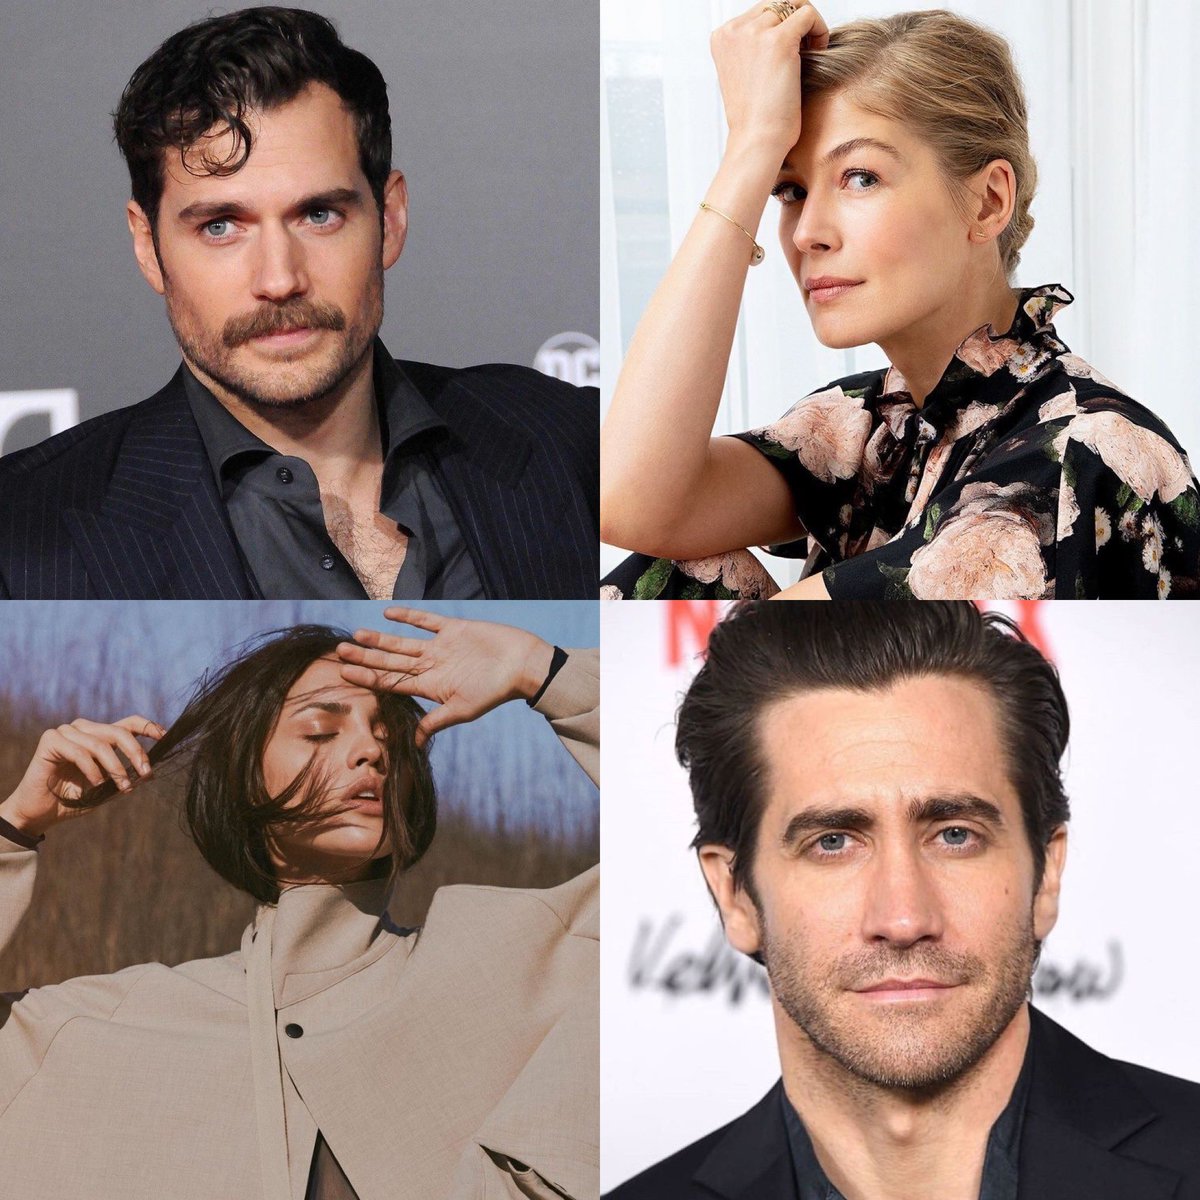 ‘IN THE GREY,’ directed by Guy Ritchie, and starring Jake Gyllenhaal, Henry Cavill, Eiza González and Rosamund Pike is in post production and releases in January 17, 2025